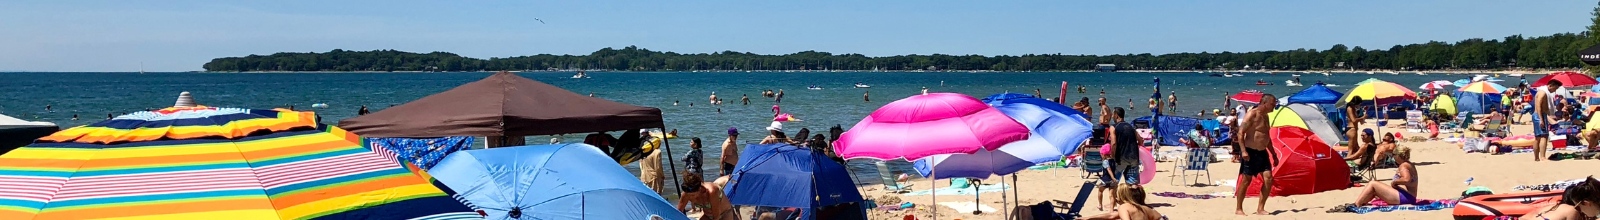 A sandy beach full of people going in and out of a lake